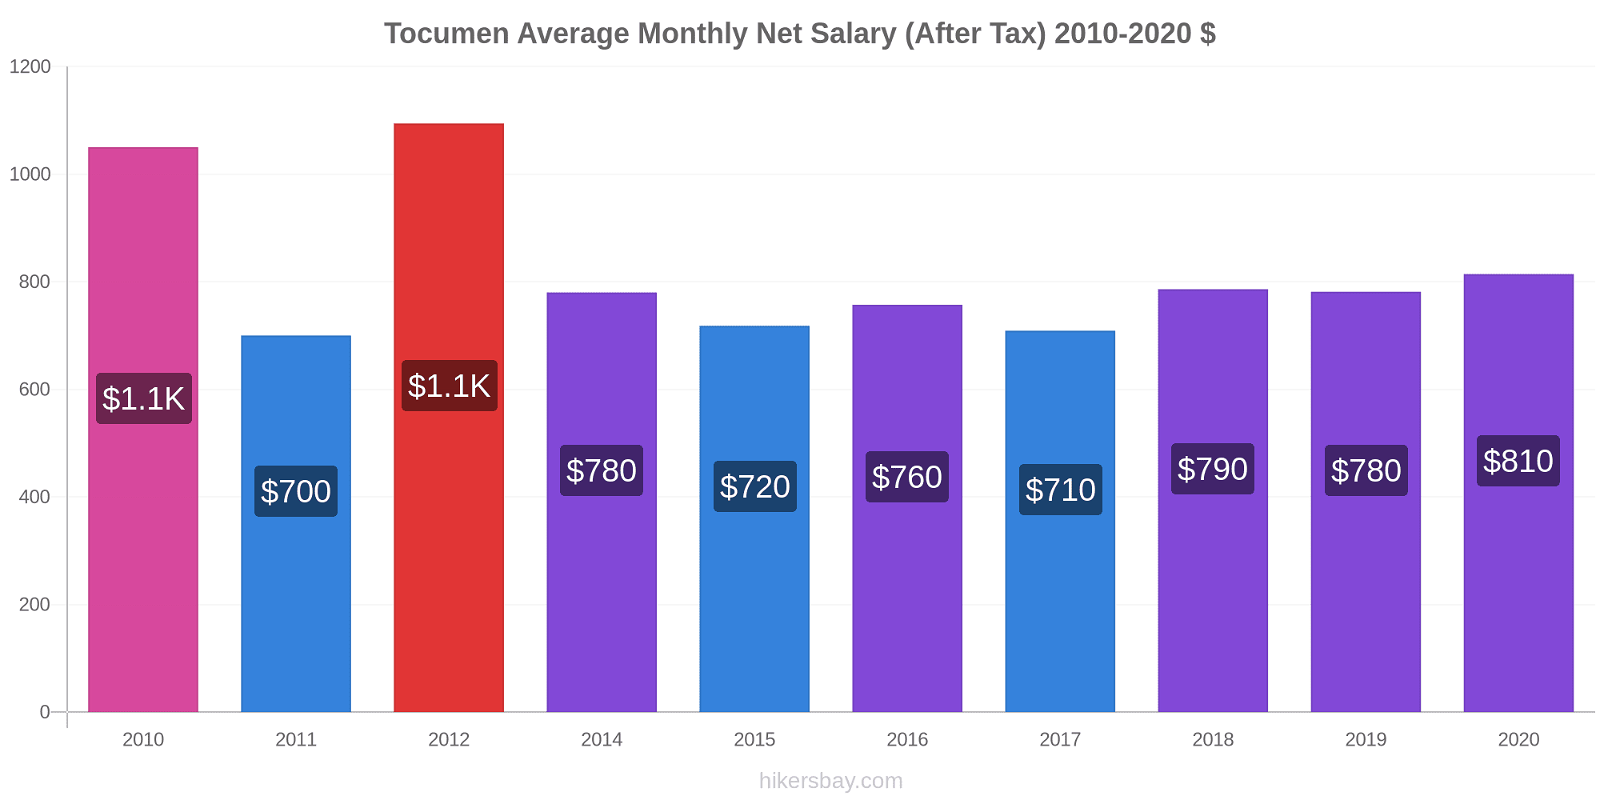 Tocumen price changes Average Monthly Net Salary (After Tax) hikersbay.com